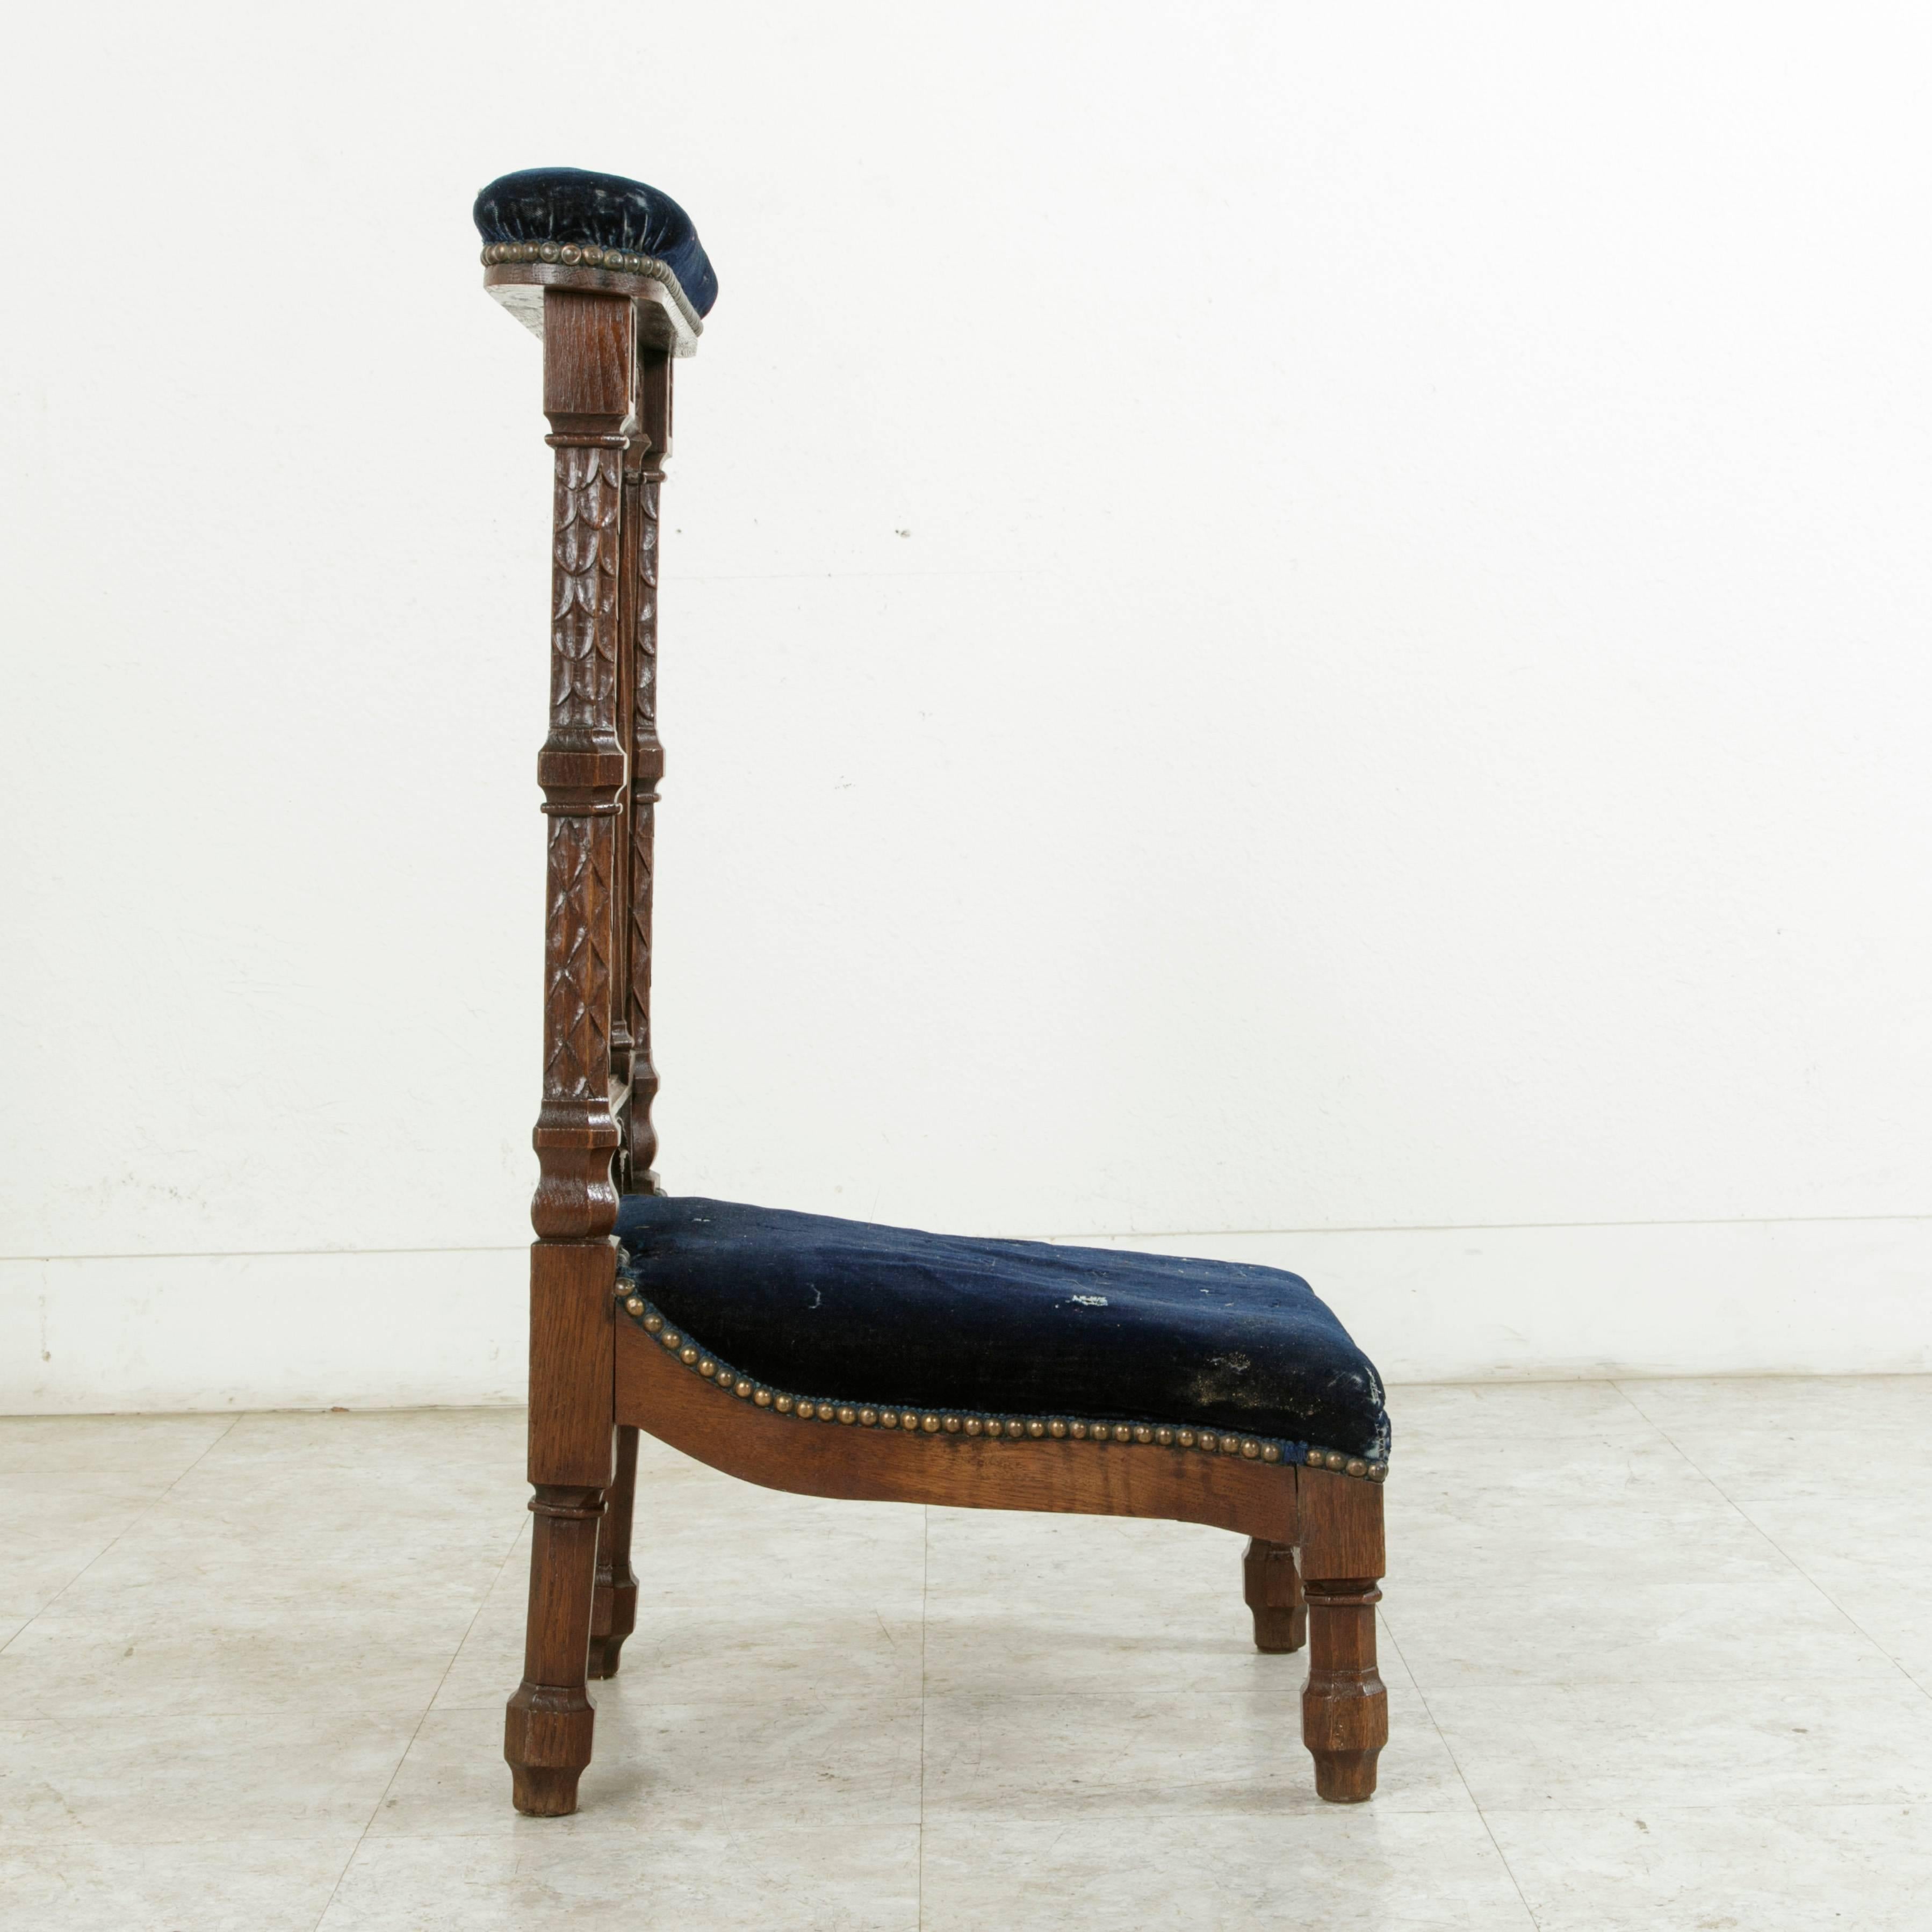 Mohair Late 19th Century French Hand-Carved Oak Prie-Dieu or Prayer Chair with Cross